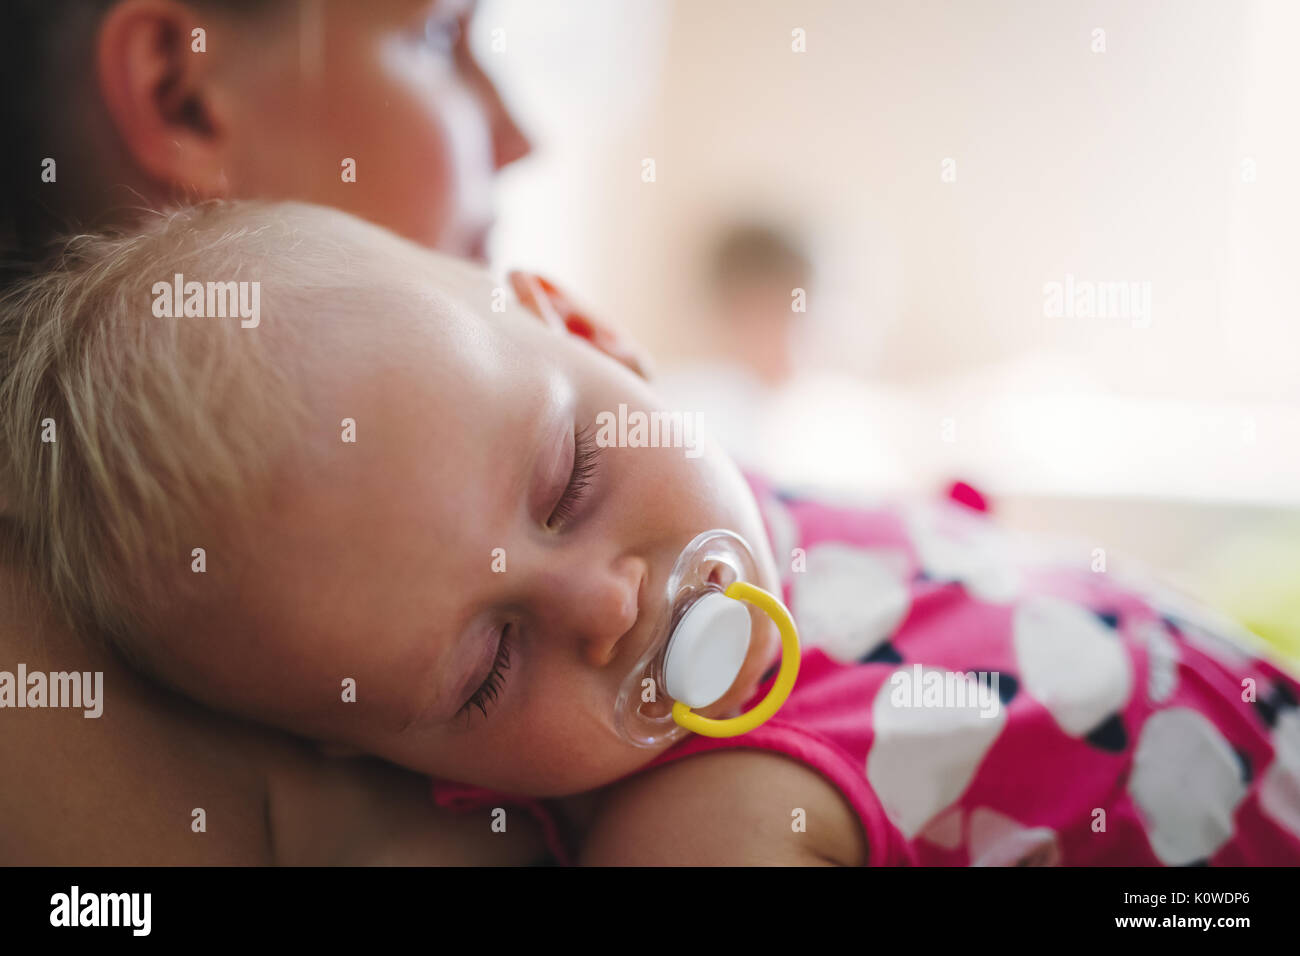 Young mother holding her sleeping newborn baby Banque D'Images